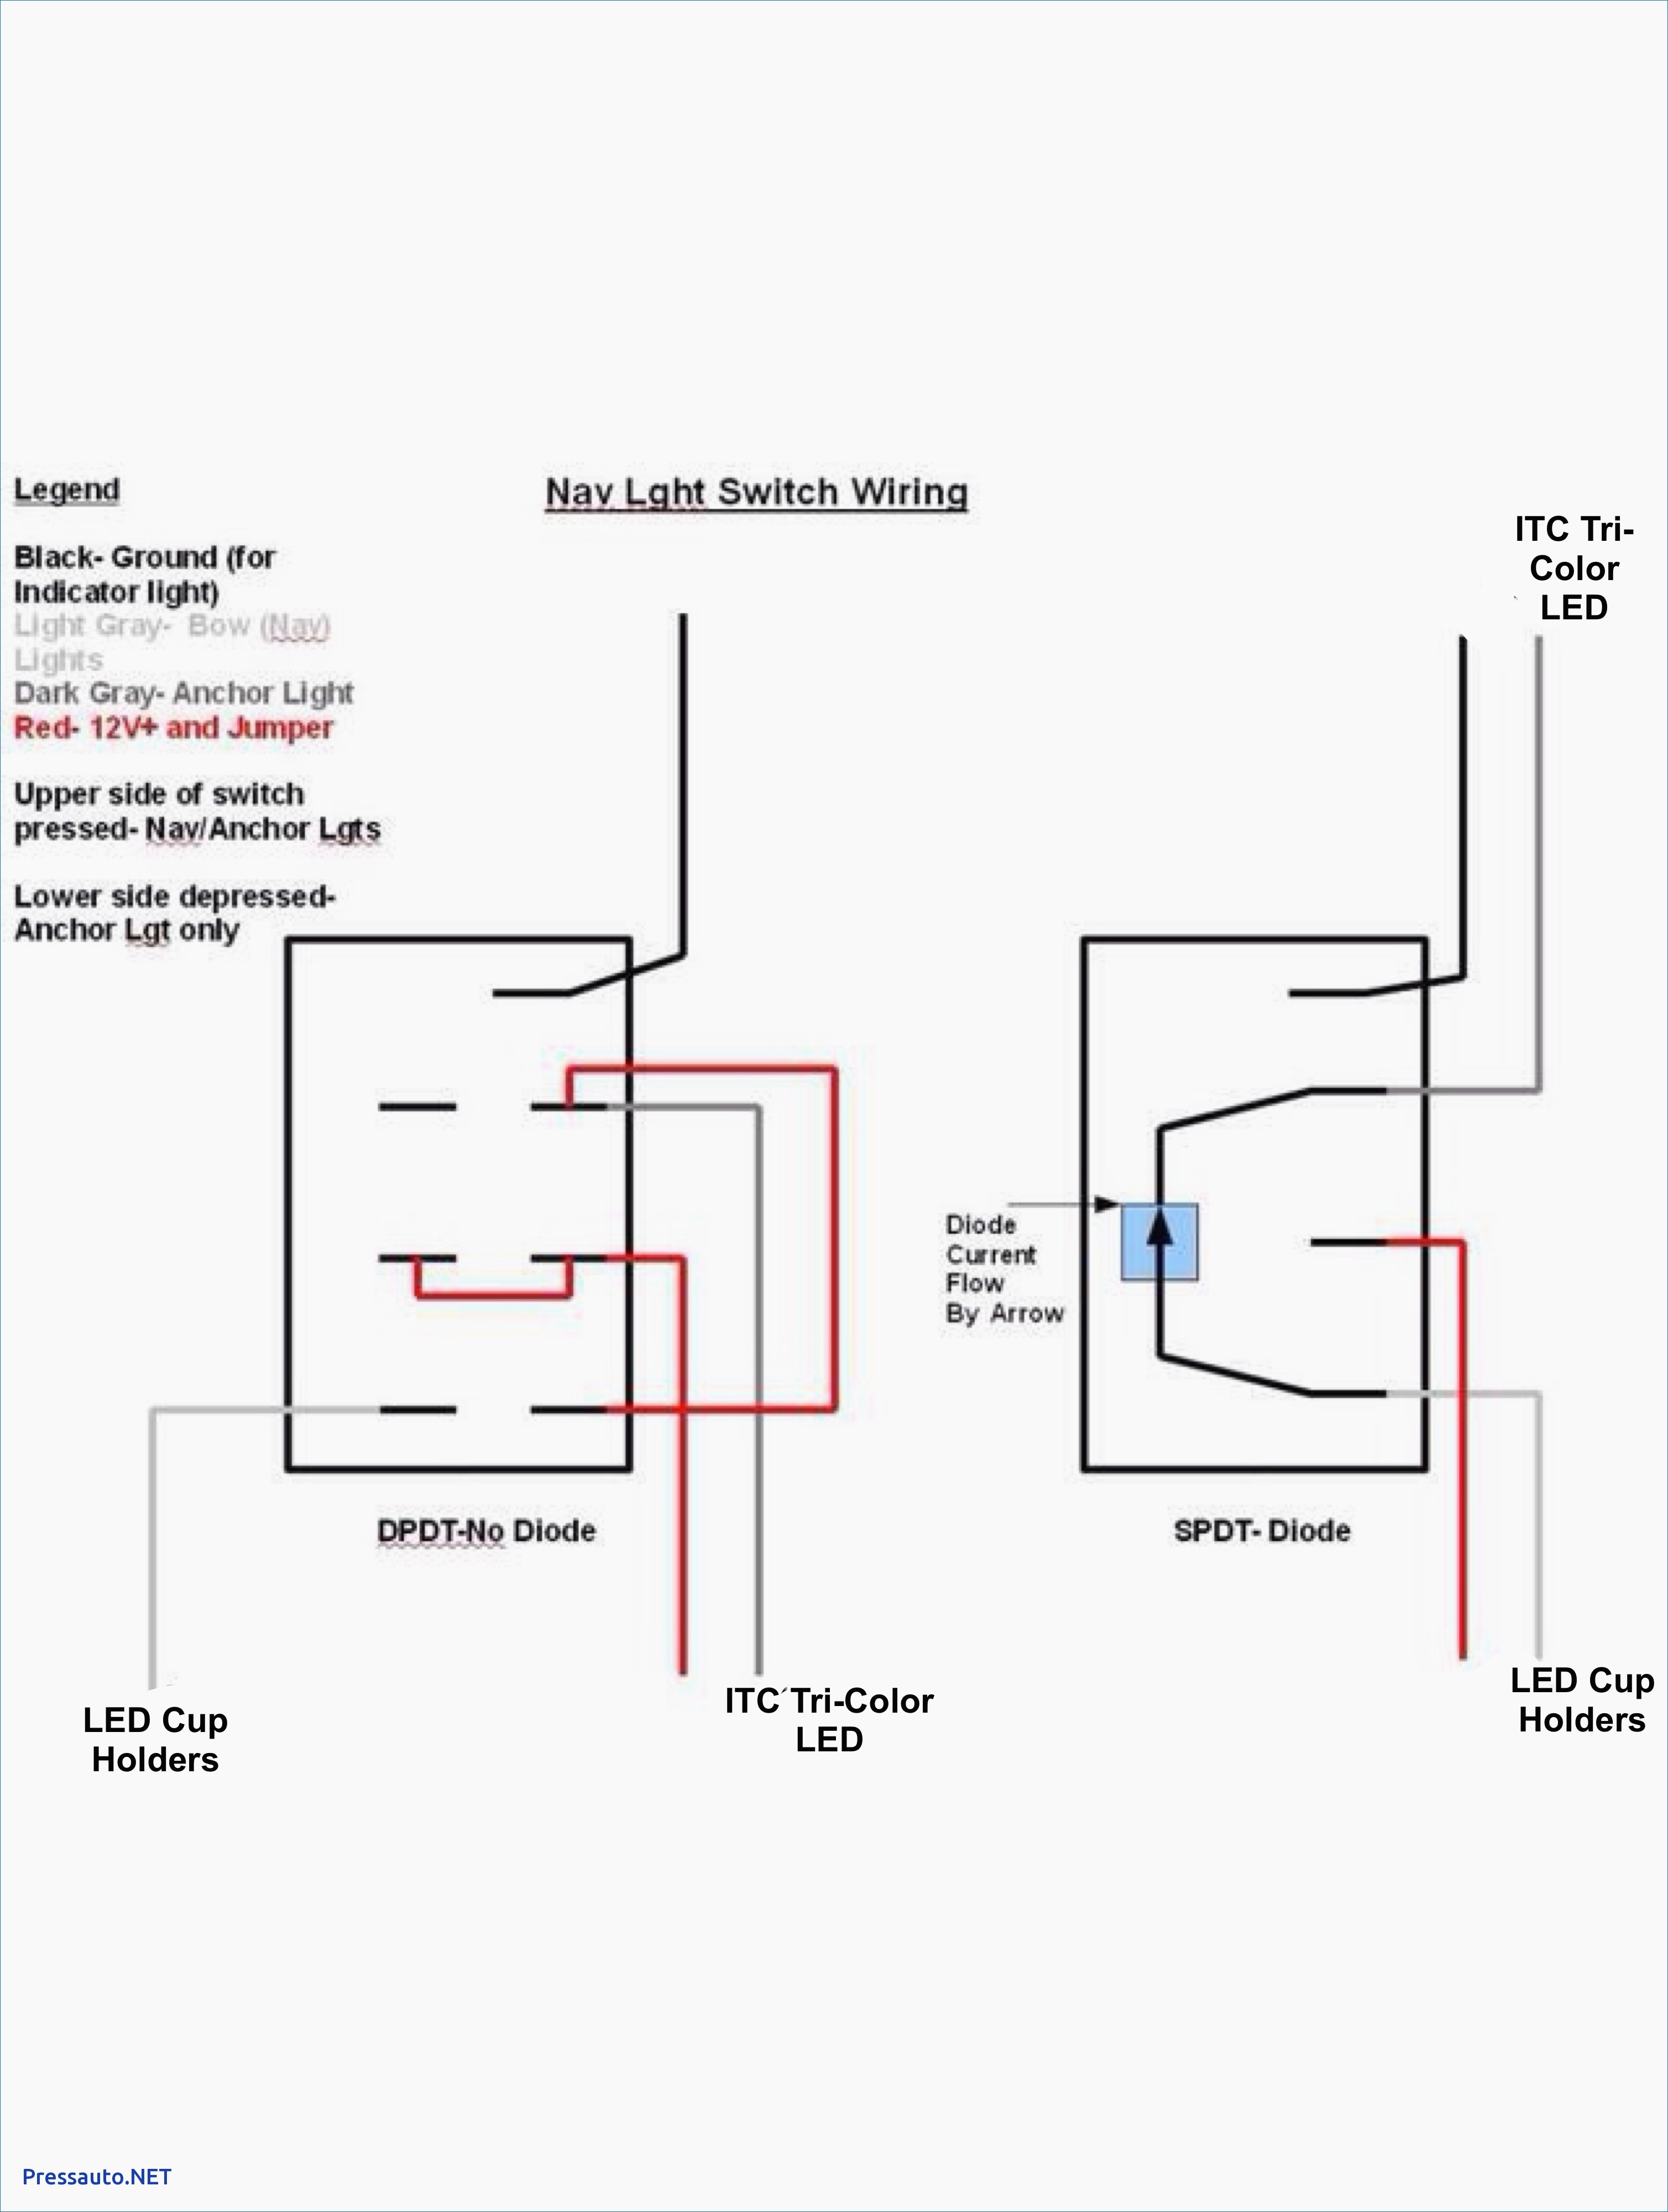 Jumper Cable Diagram Spst Relay Wiring Diagram Hbphelp Of Jumper Cable Diagram